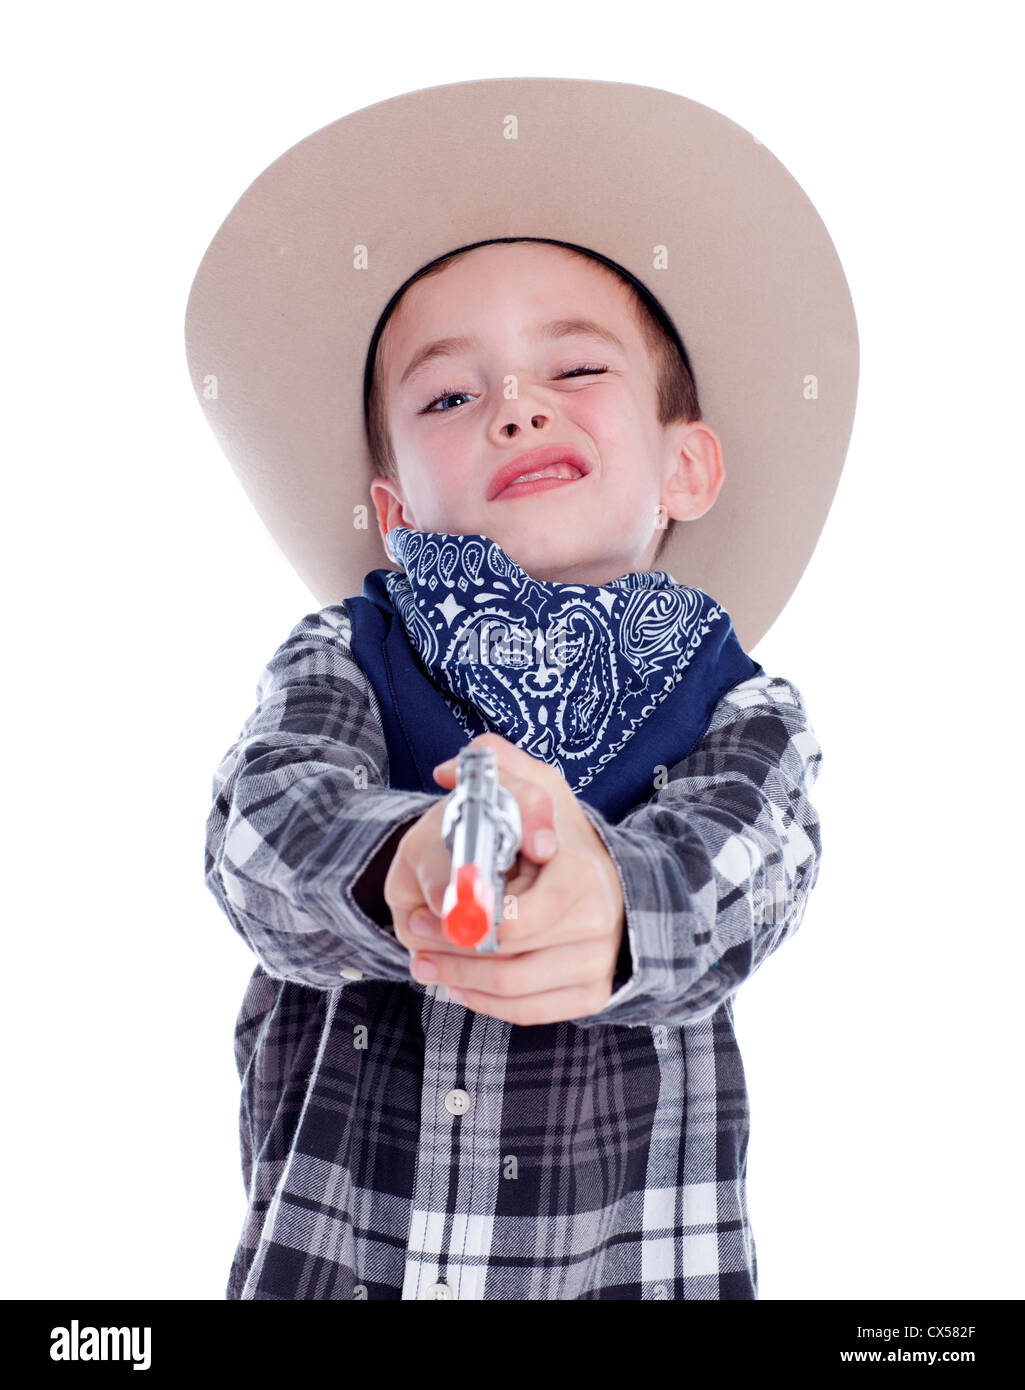 Young boy dressed as a cowboy with gun Stock Photo